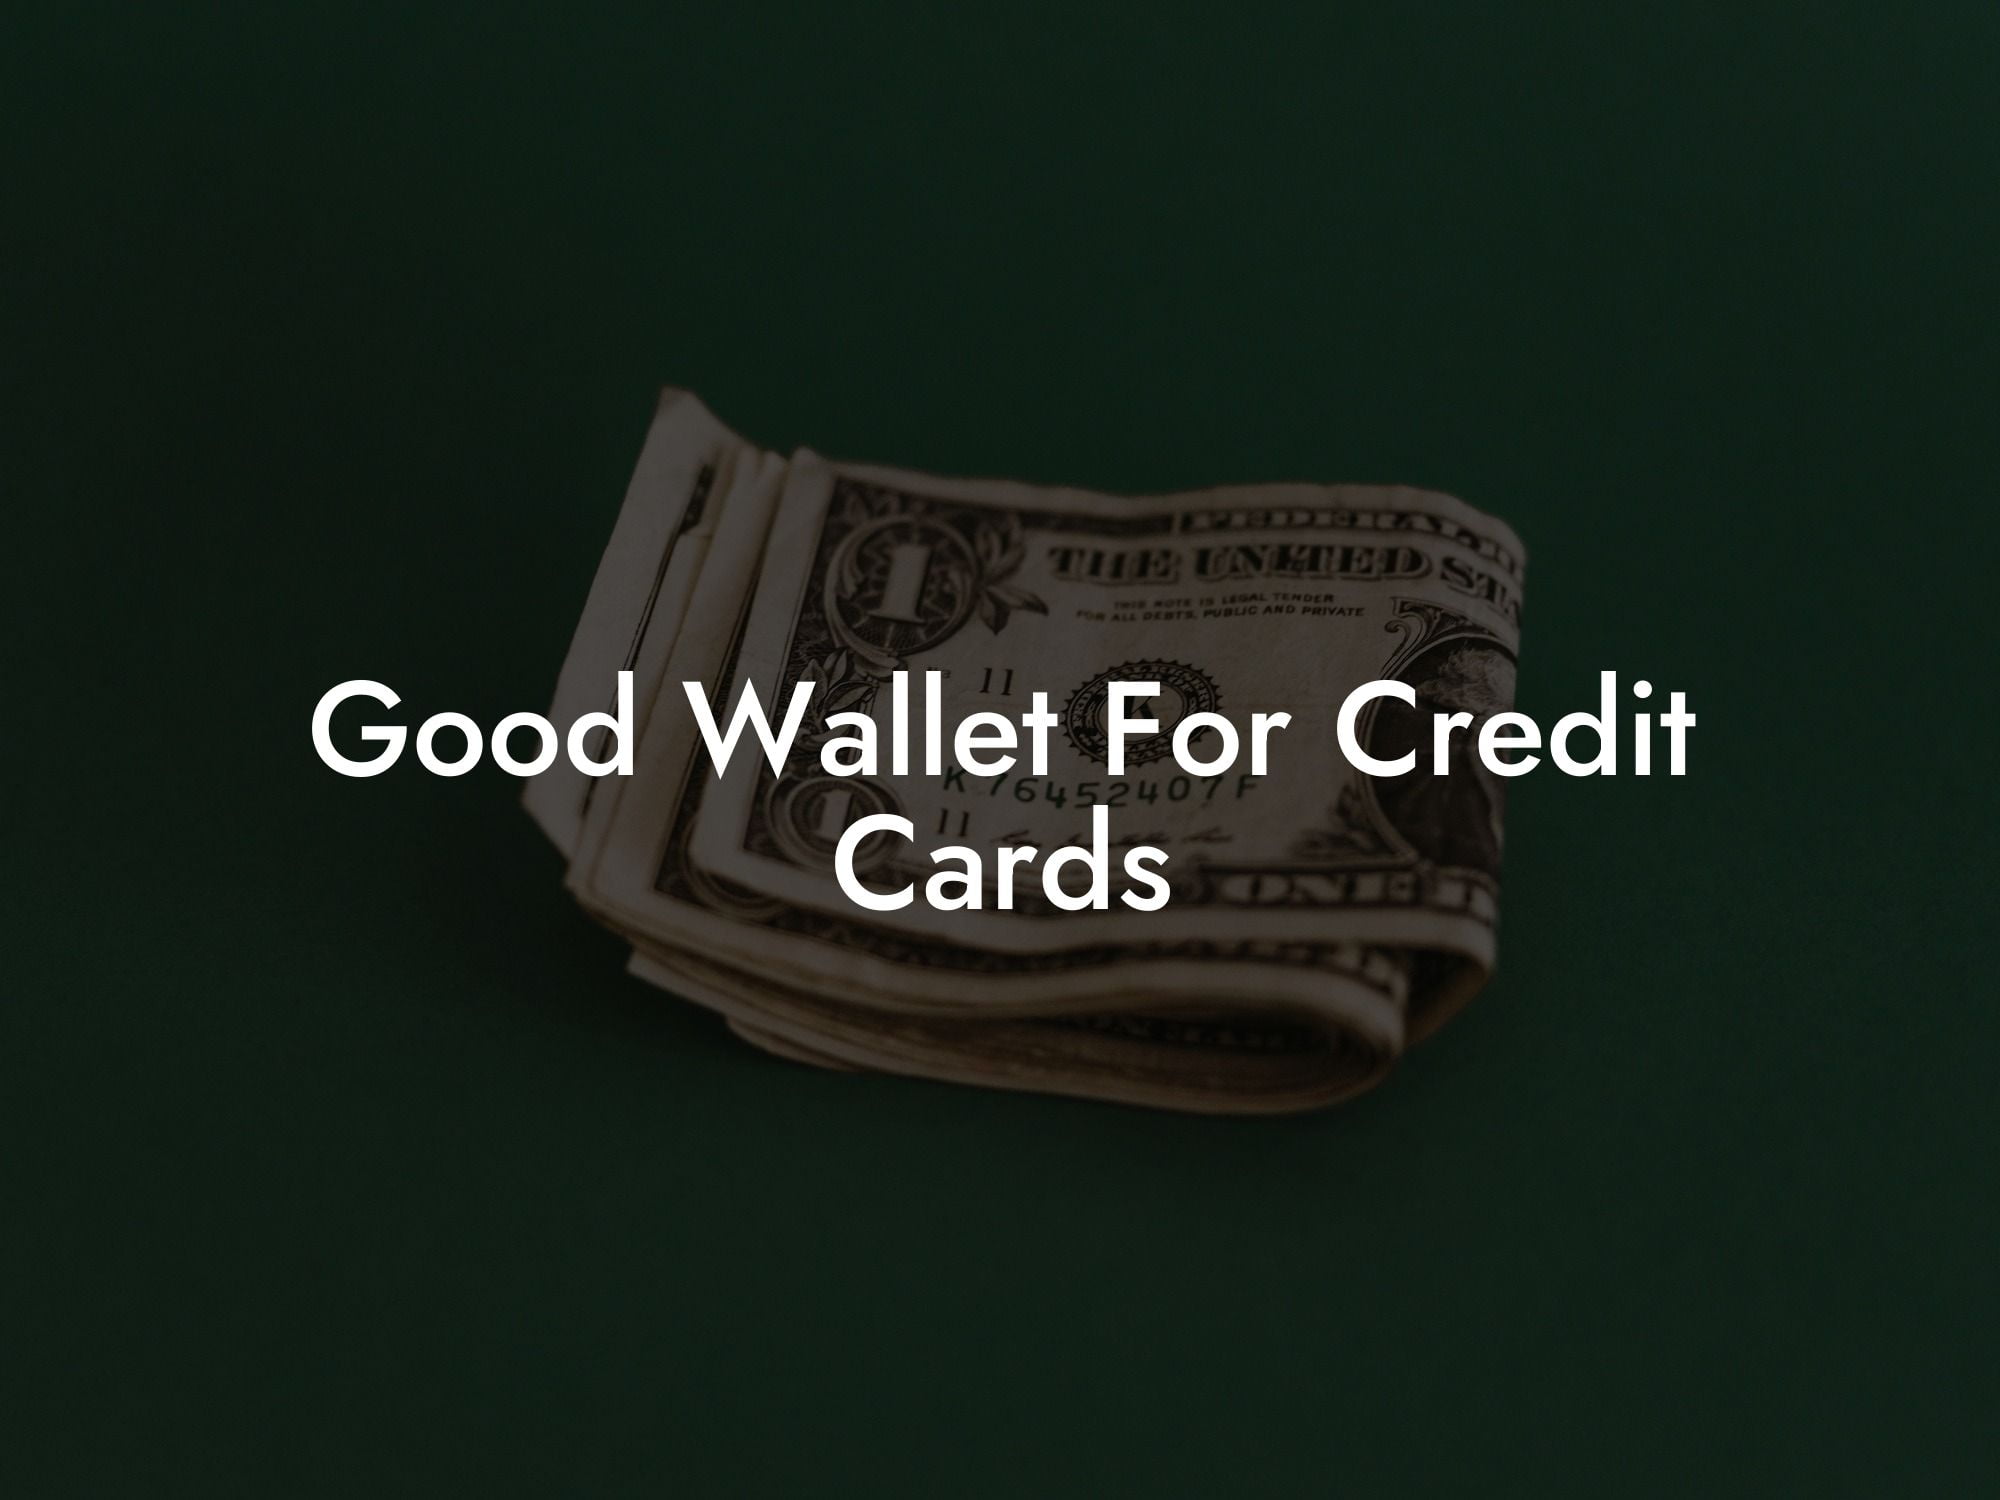 Good Wallet For Credit Cards